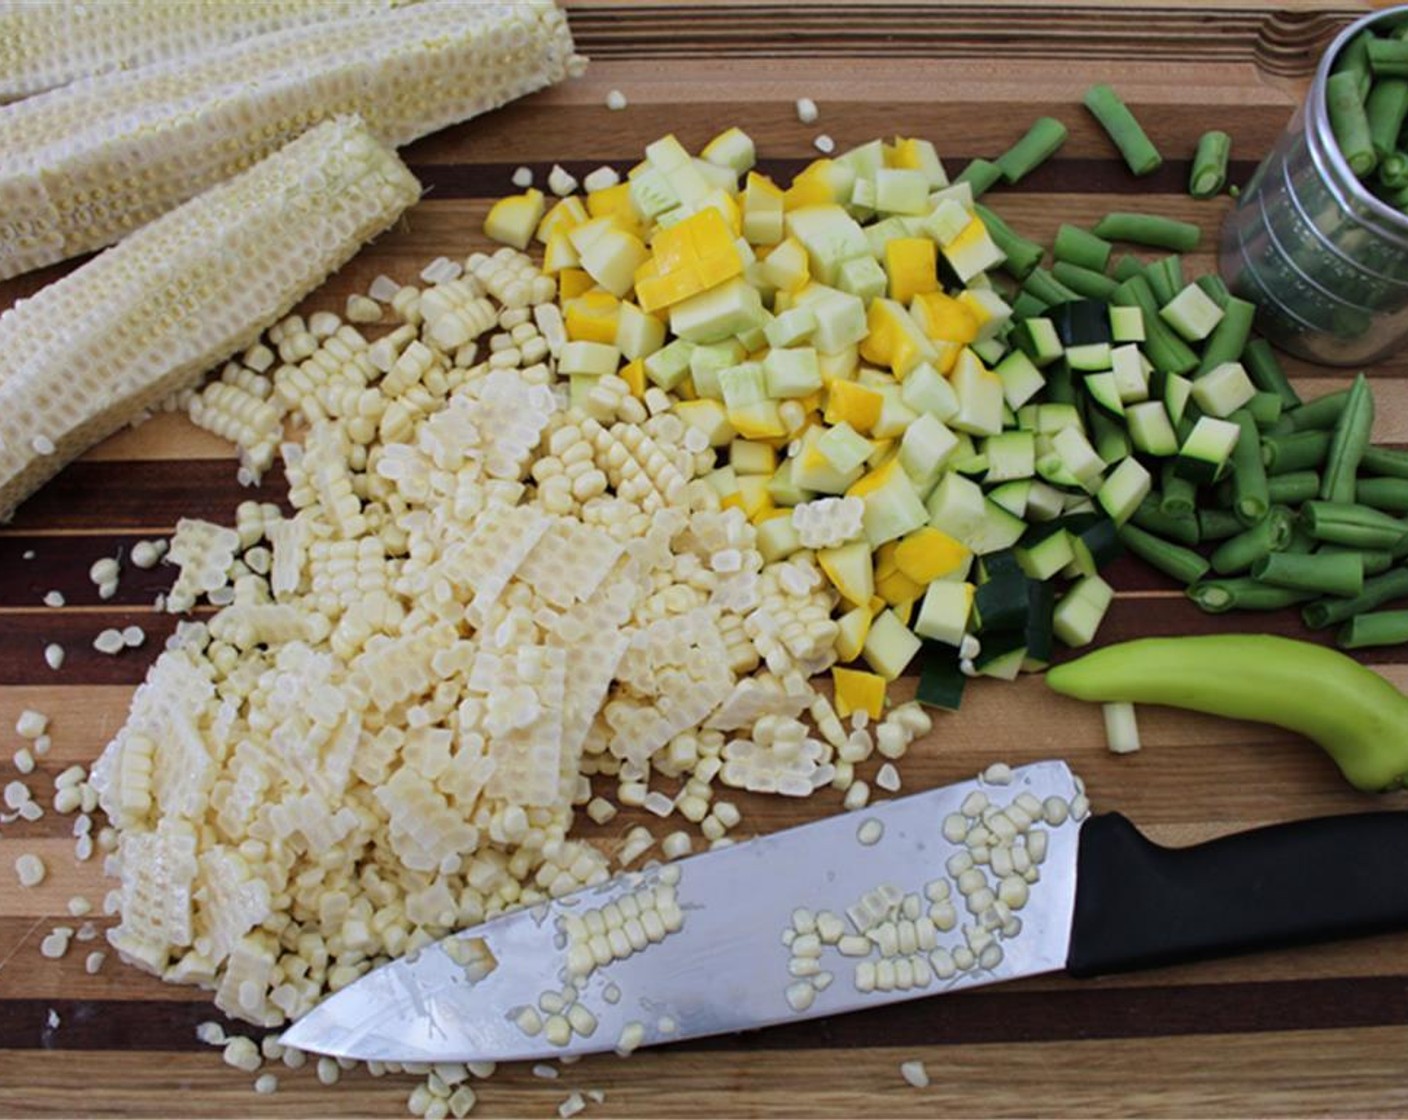 step 1 Cut the Green Beans (2 cups) into one-inch pieces. Shuck and slice the kernels from the Corn (3 ears). Chop the Summer Squash (2 cups). Mince the Garlic (2 cloves). If using, dice the Chili Pepper (1) and deseed if you like.